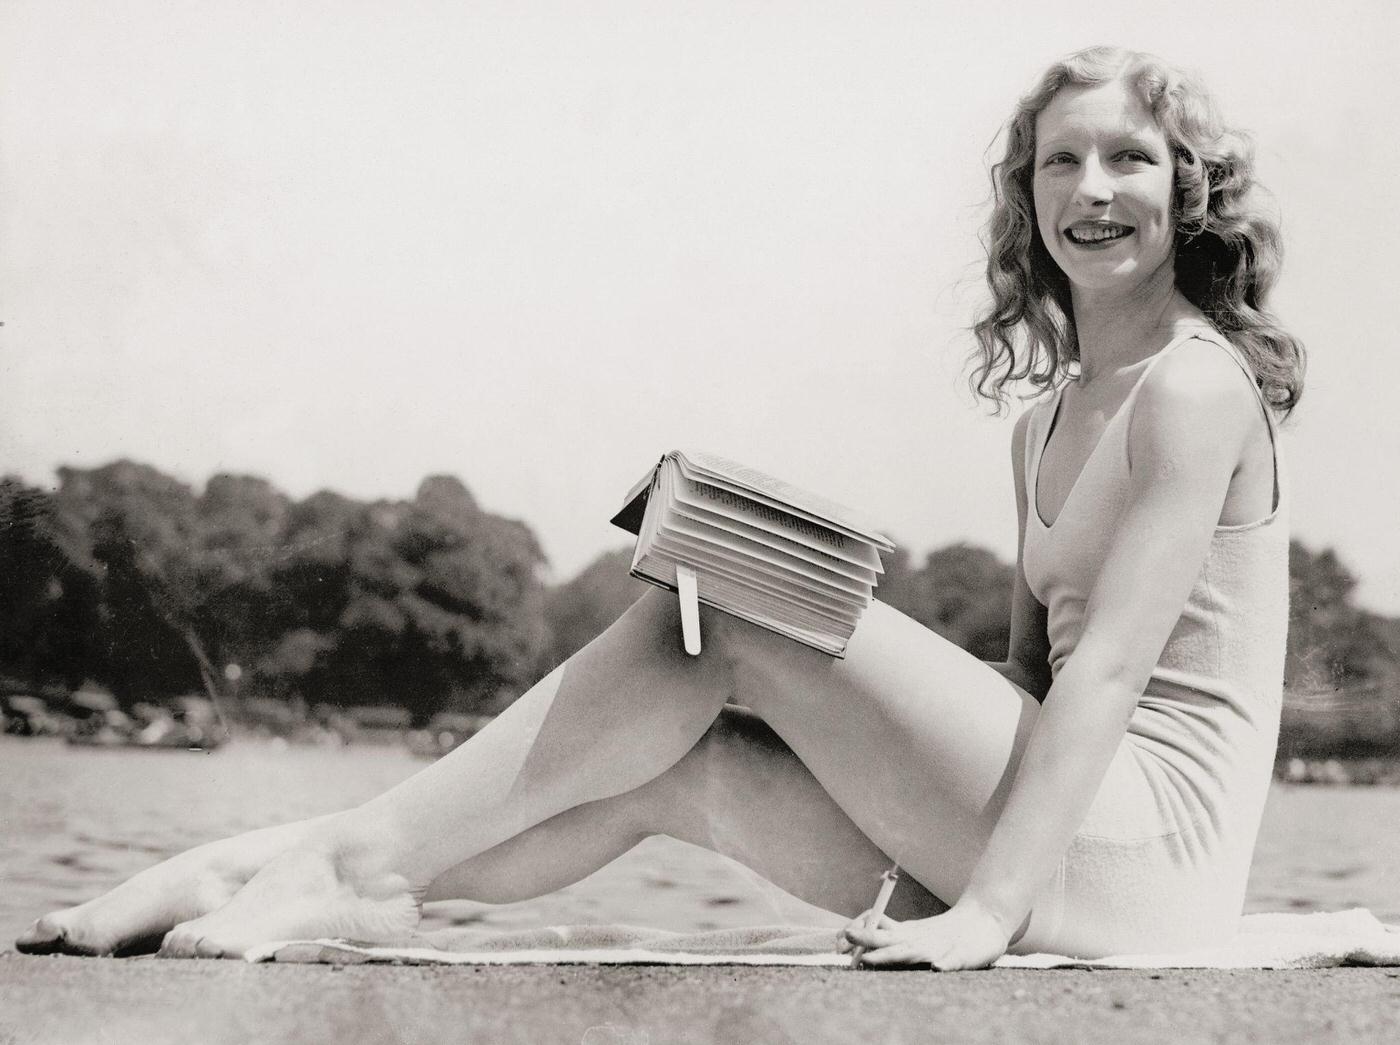 Sunbathing girl in her bathing suit in Hyde Park, London, smoking a cigarette and reading a book, 1932